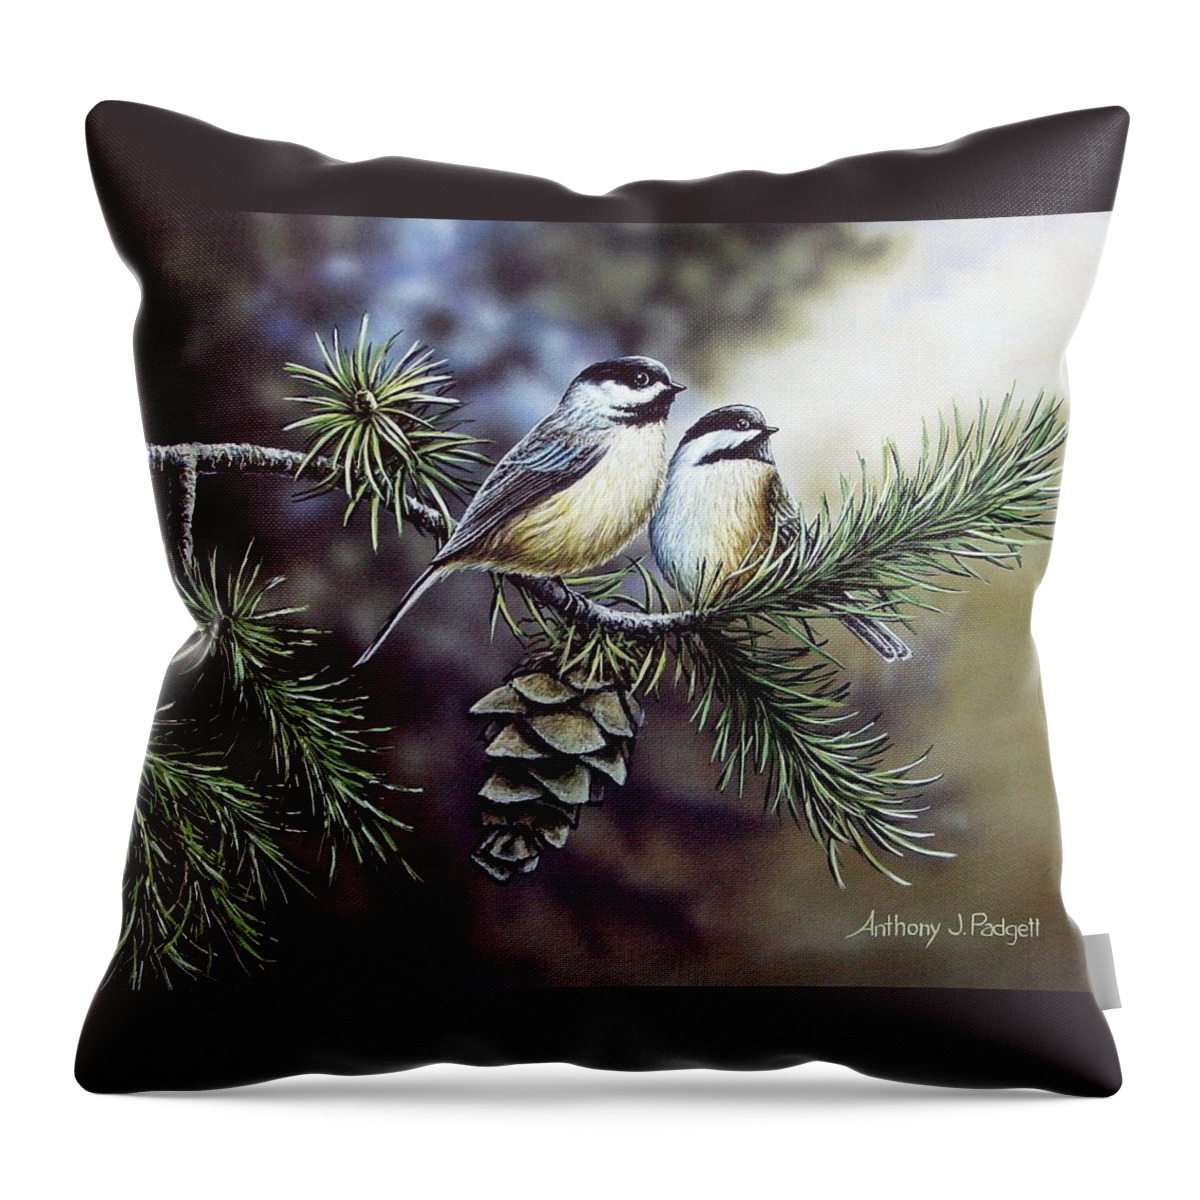 Chickadees Throw Pillow featuring the painting Evergreen Chickadees by Anthony J Padgett